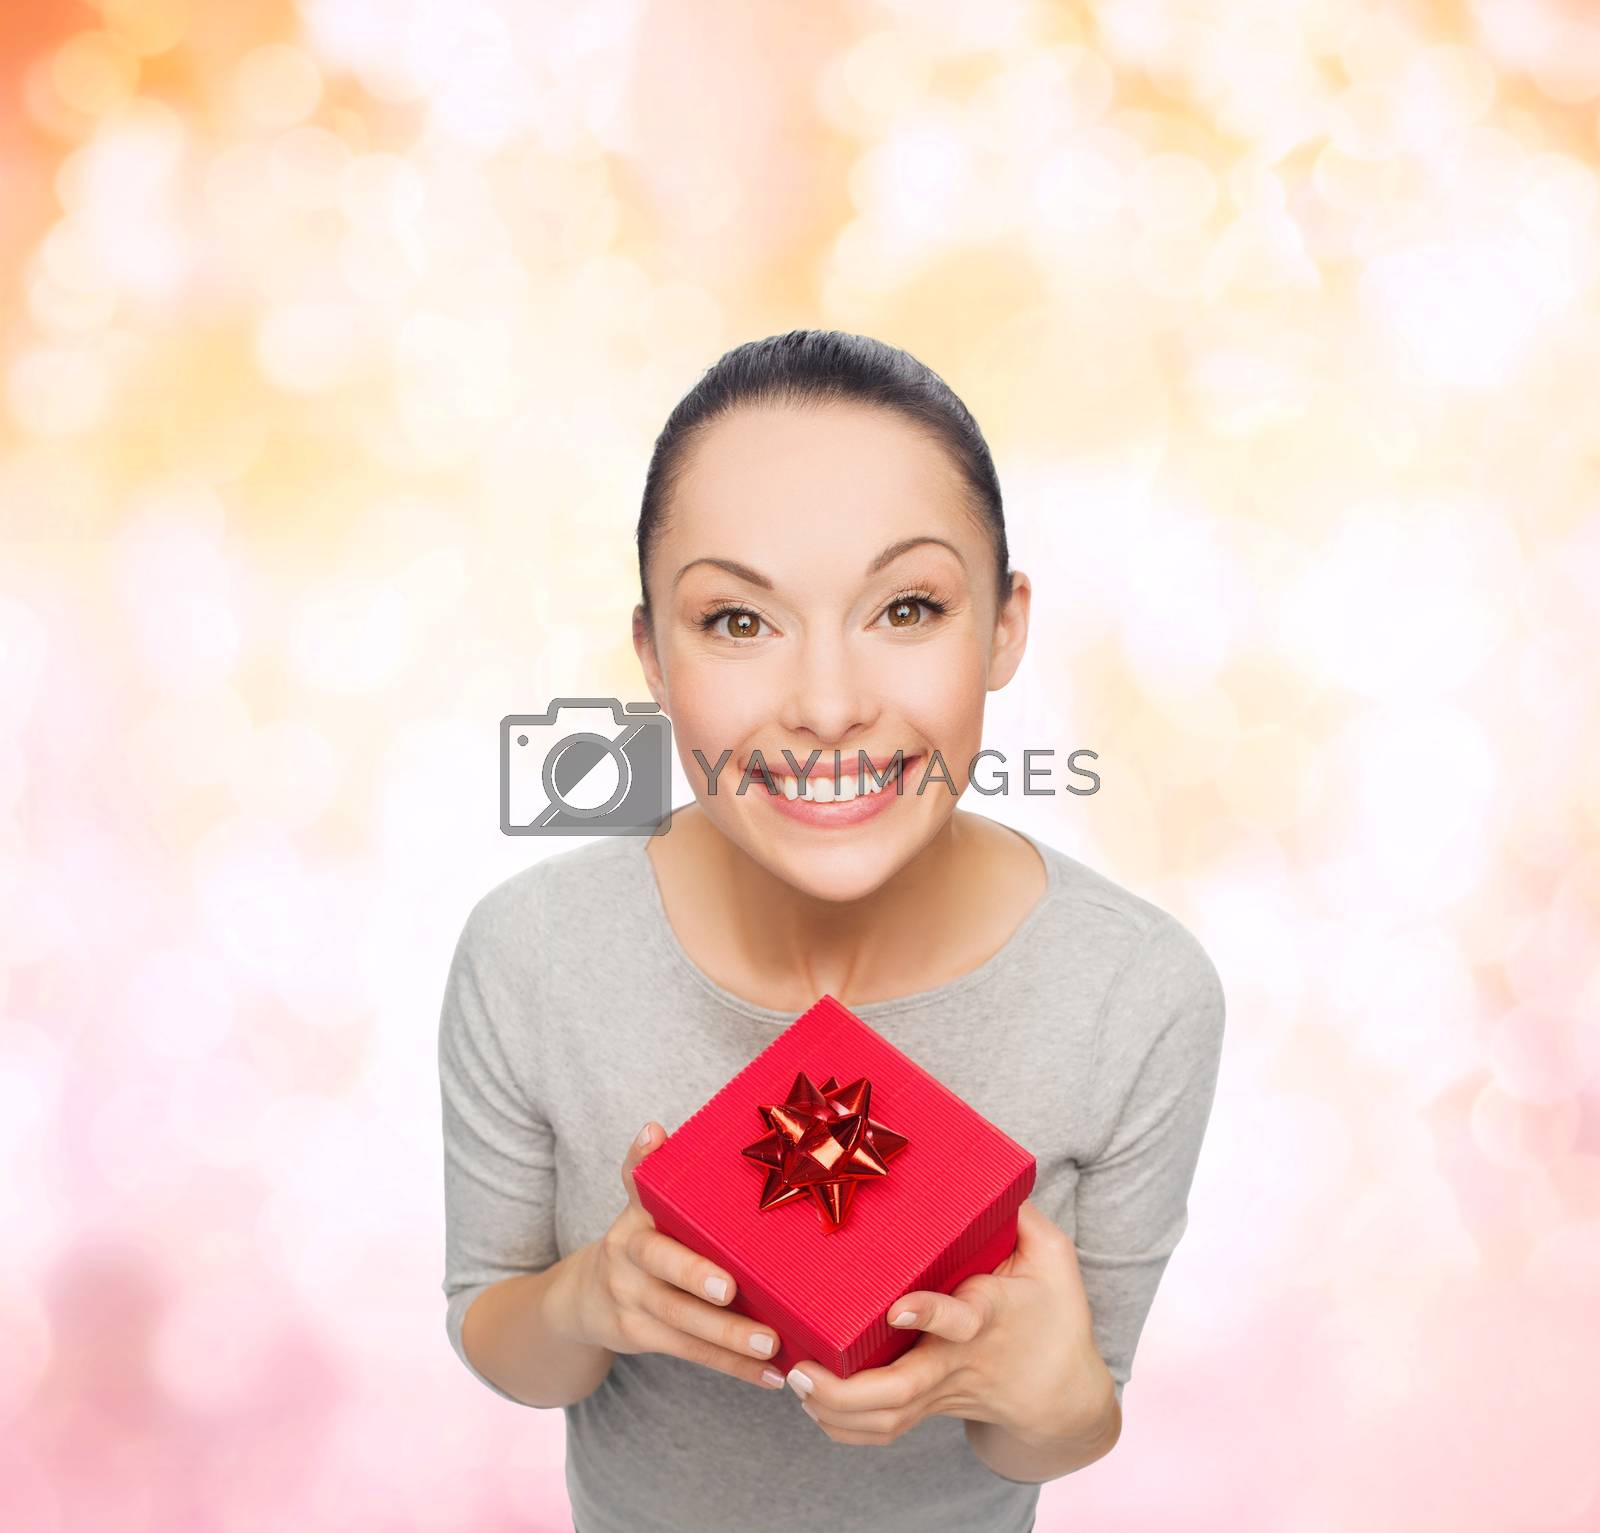 Royalty free image of smiling asian woman with red gift box by dolgachov